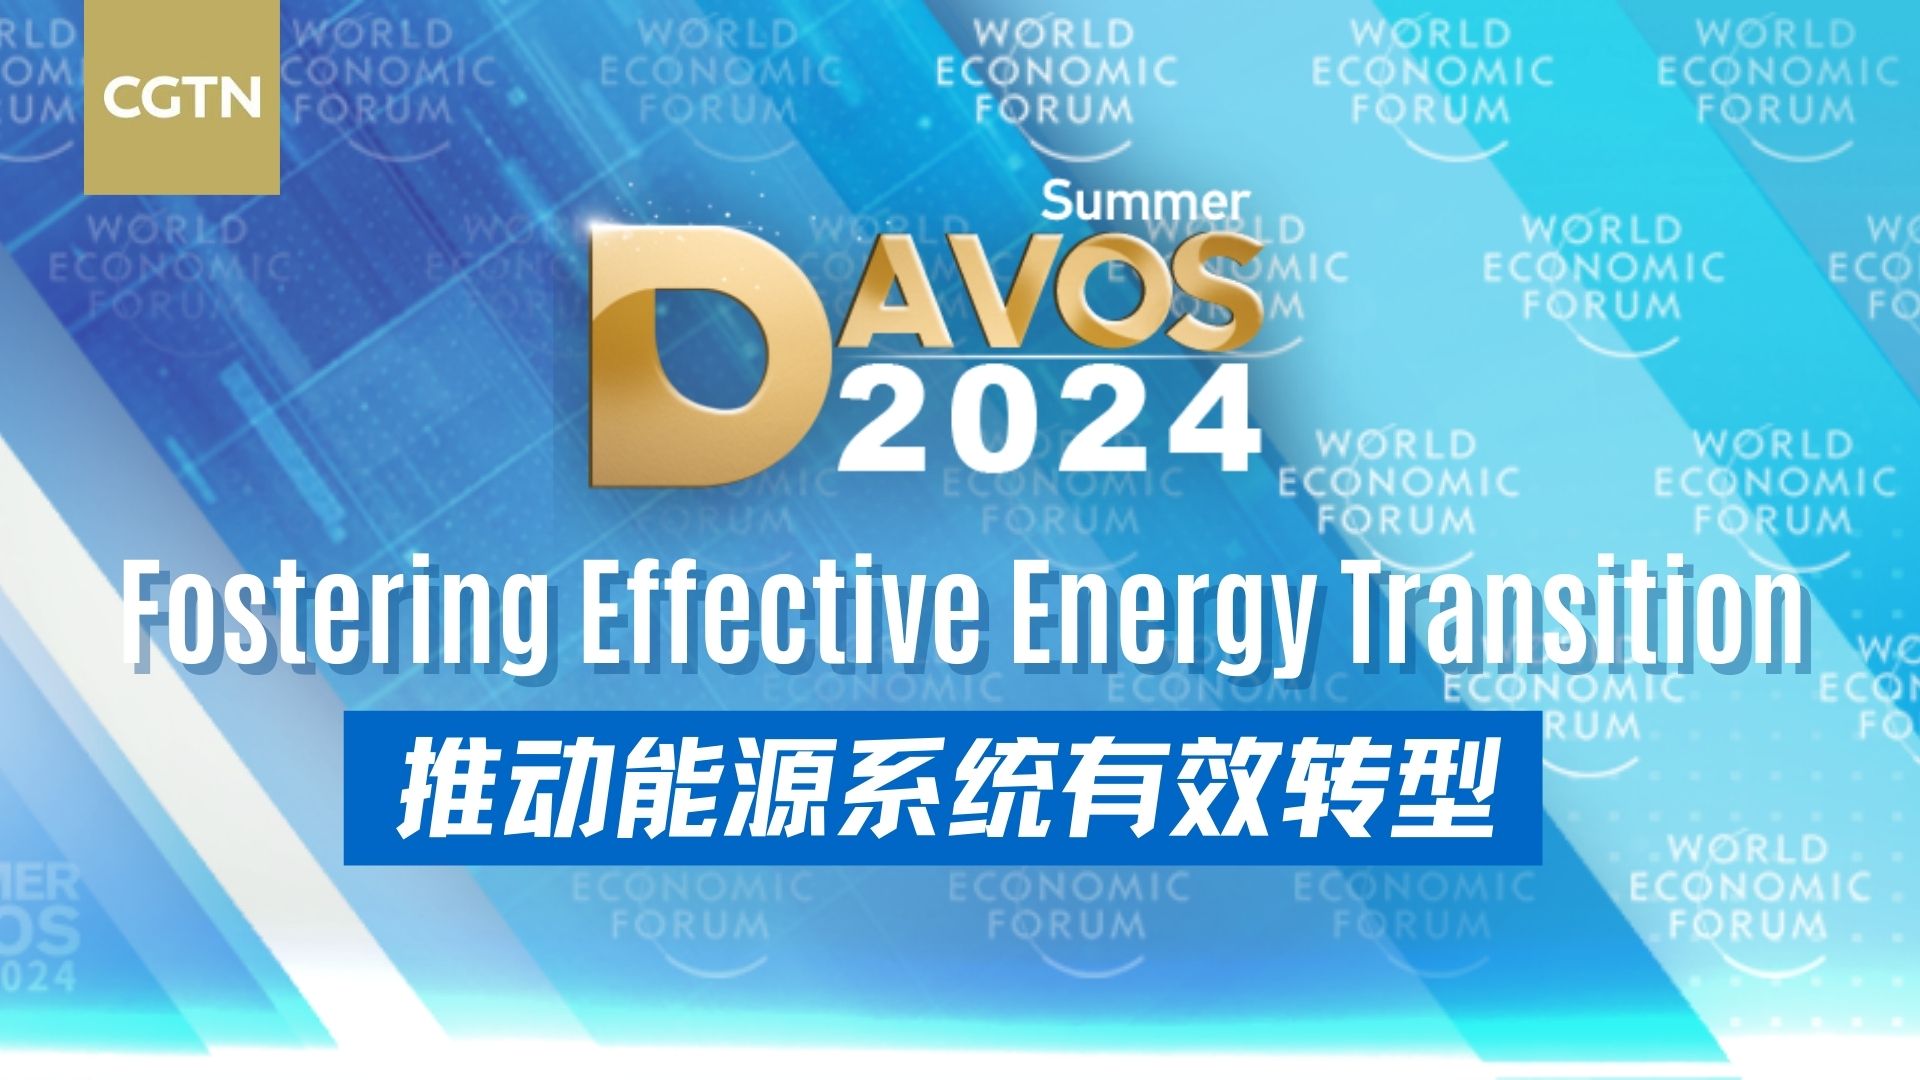 Live: Fostering effective energy transition